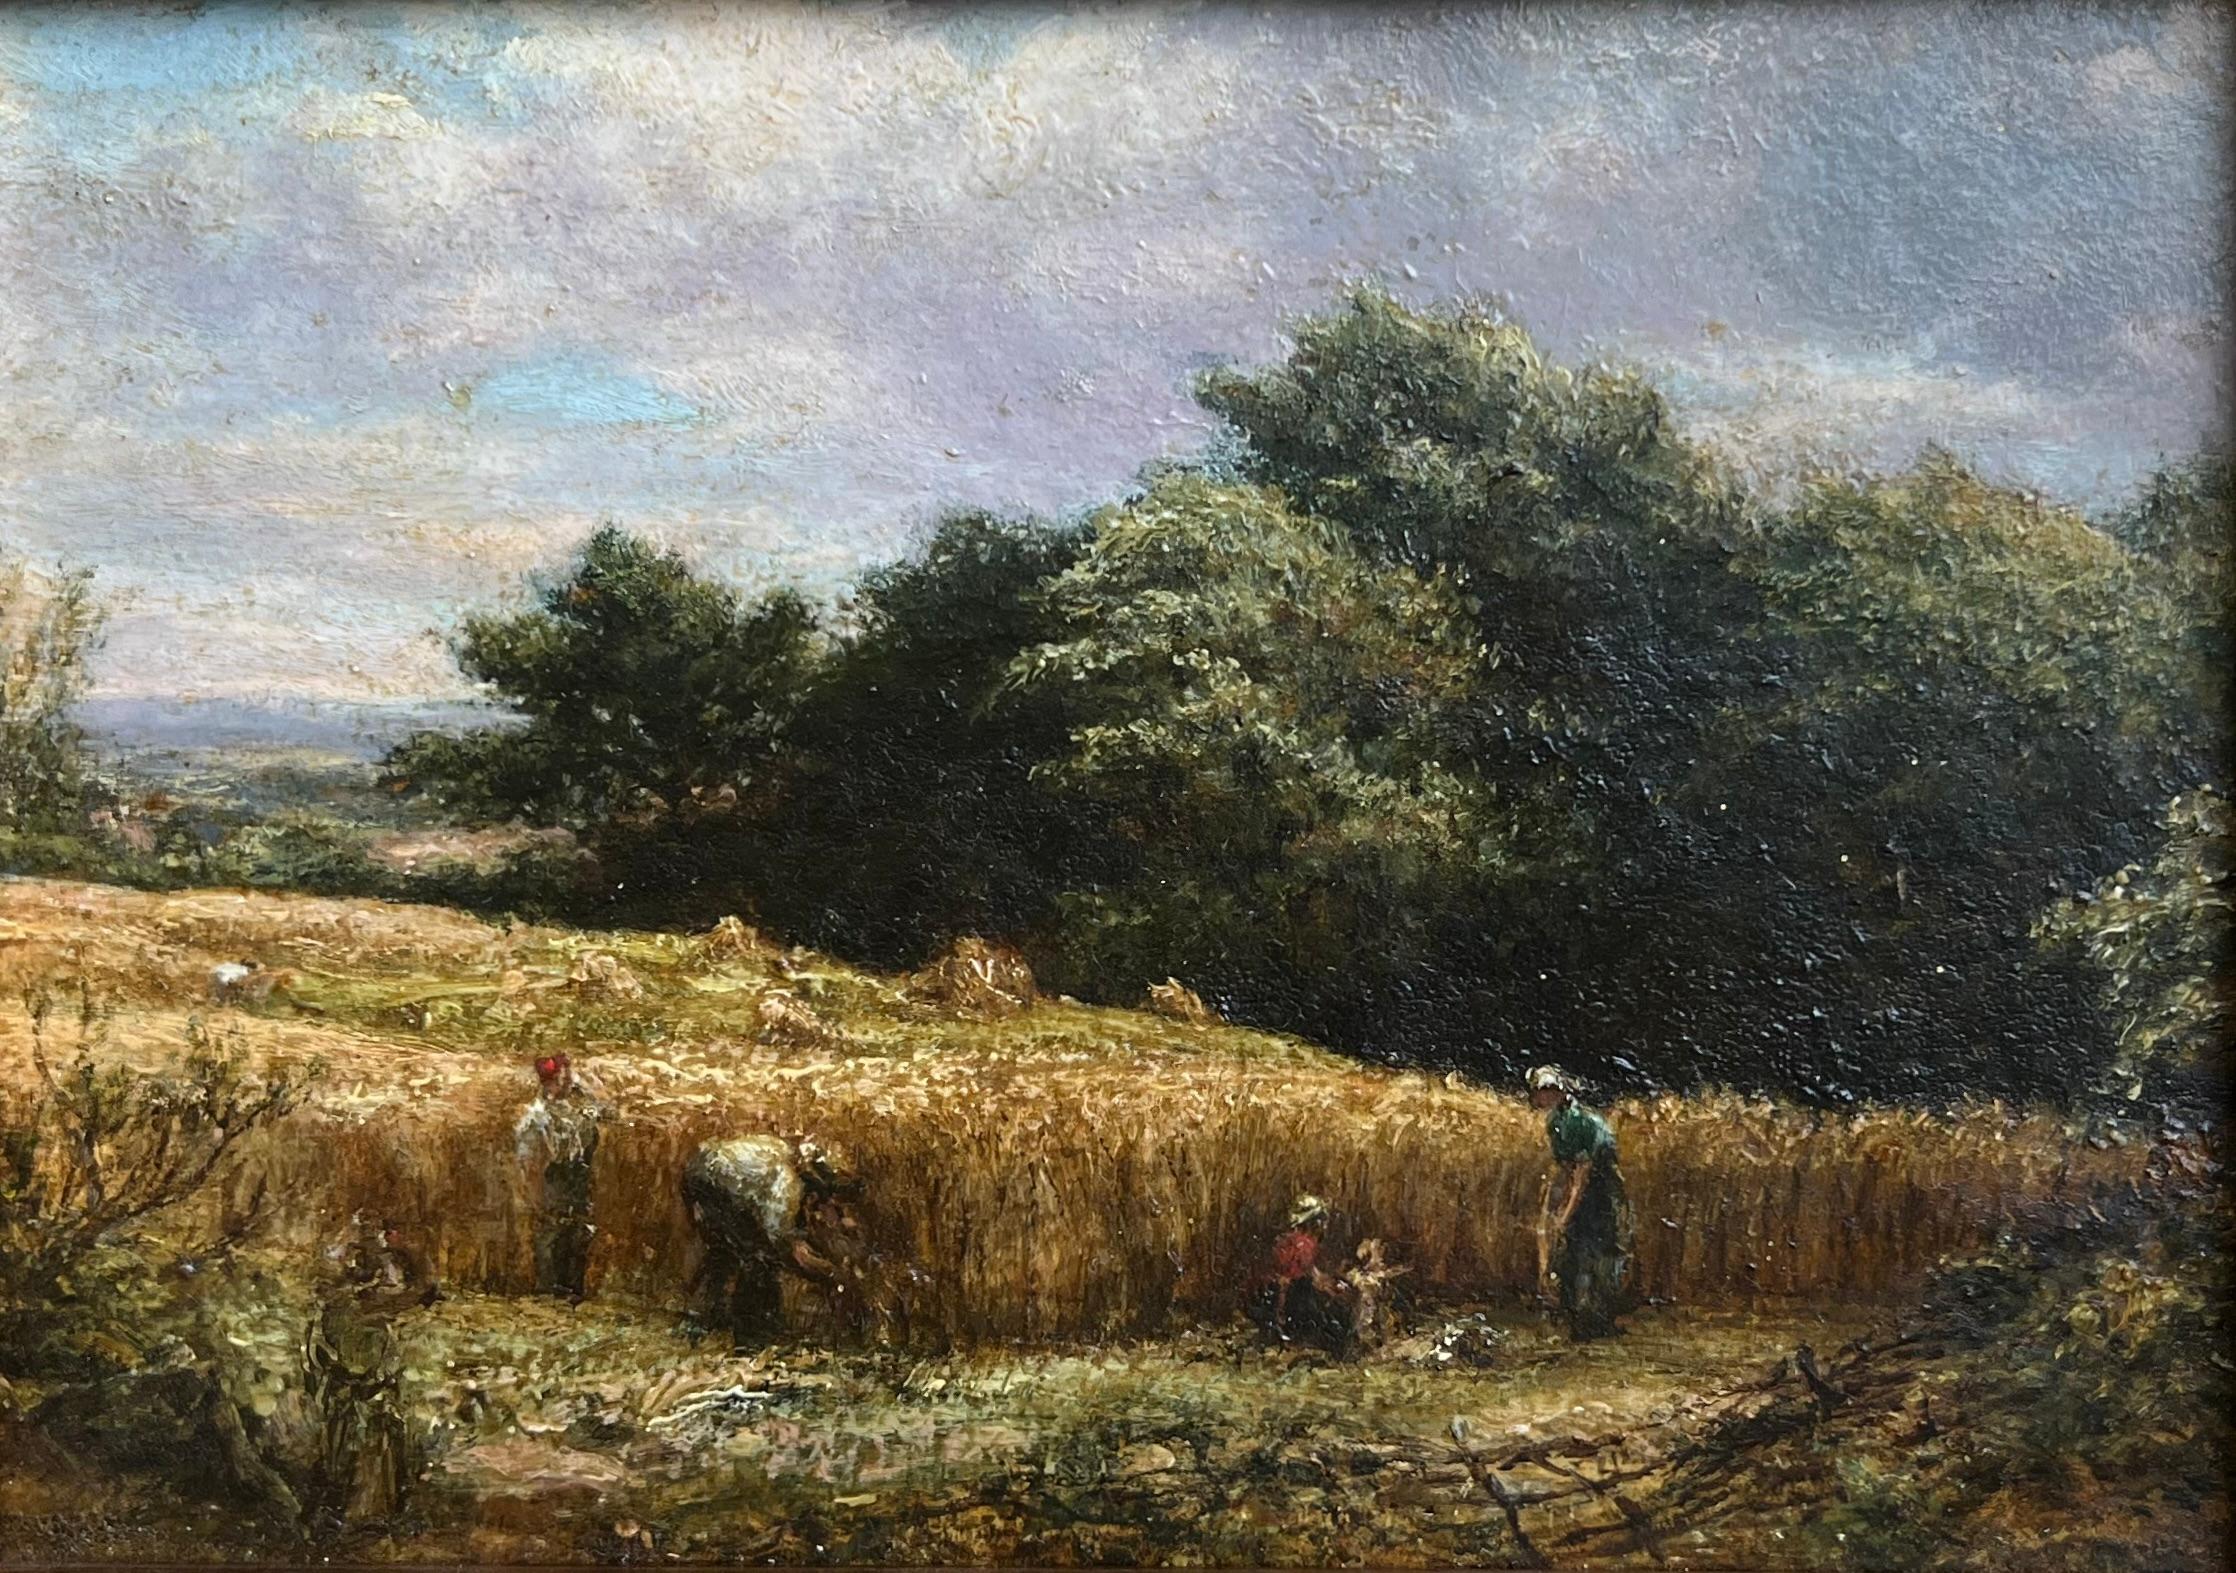 A really charming little oil capturing an idyllic snapshot of farm workers and their family harvesting in the sunshine

Attributed to Léon Augustin L'Hermitte (1844-1925)
Harvesters in th field
Oil on board
5 x 7  inches without the frame
8 x 10½